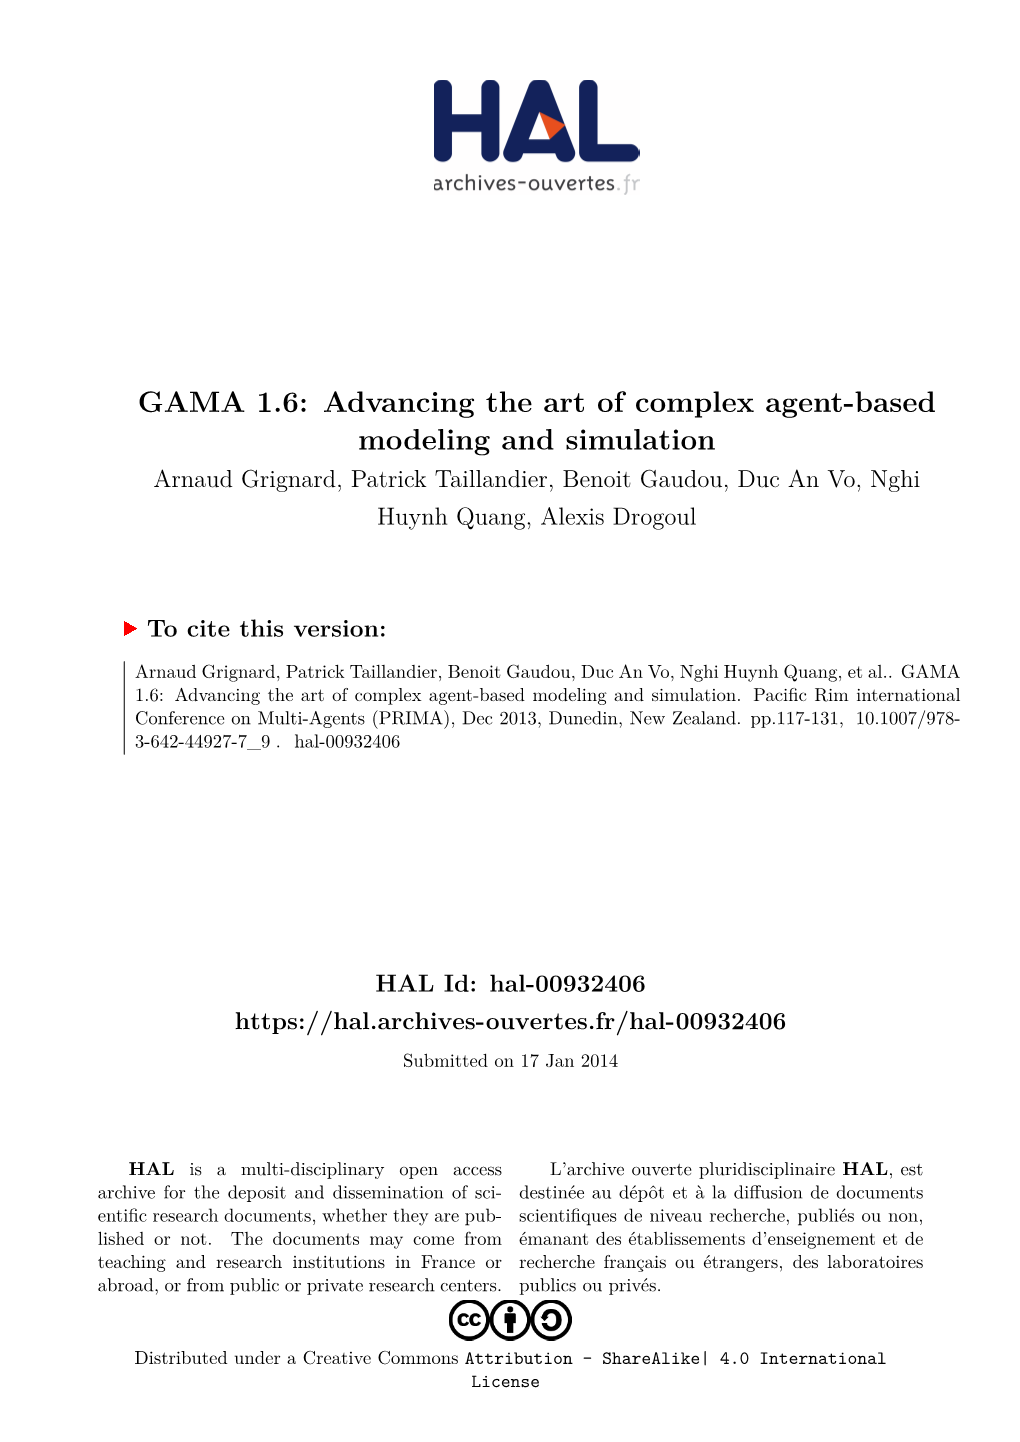 GAMA 1.6: Advancing the Art of Complex Agent-Based Modeling